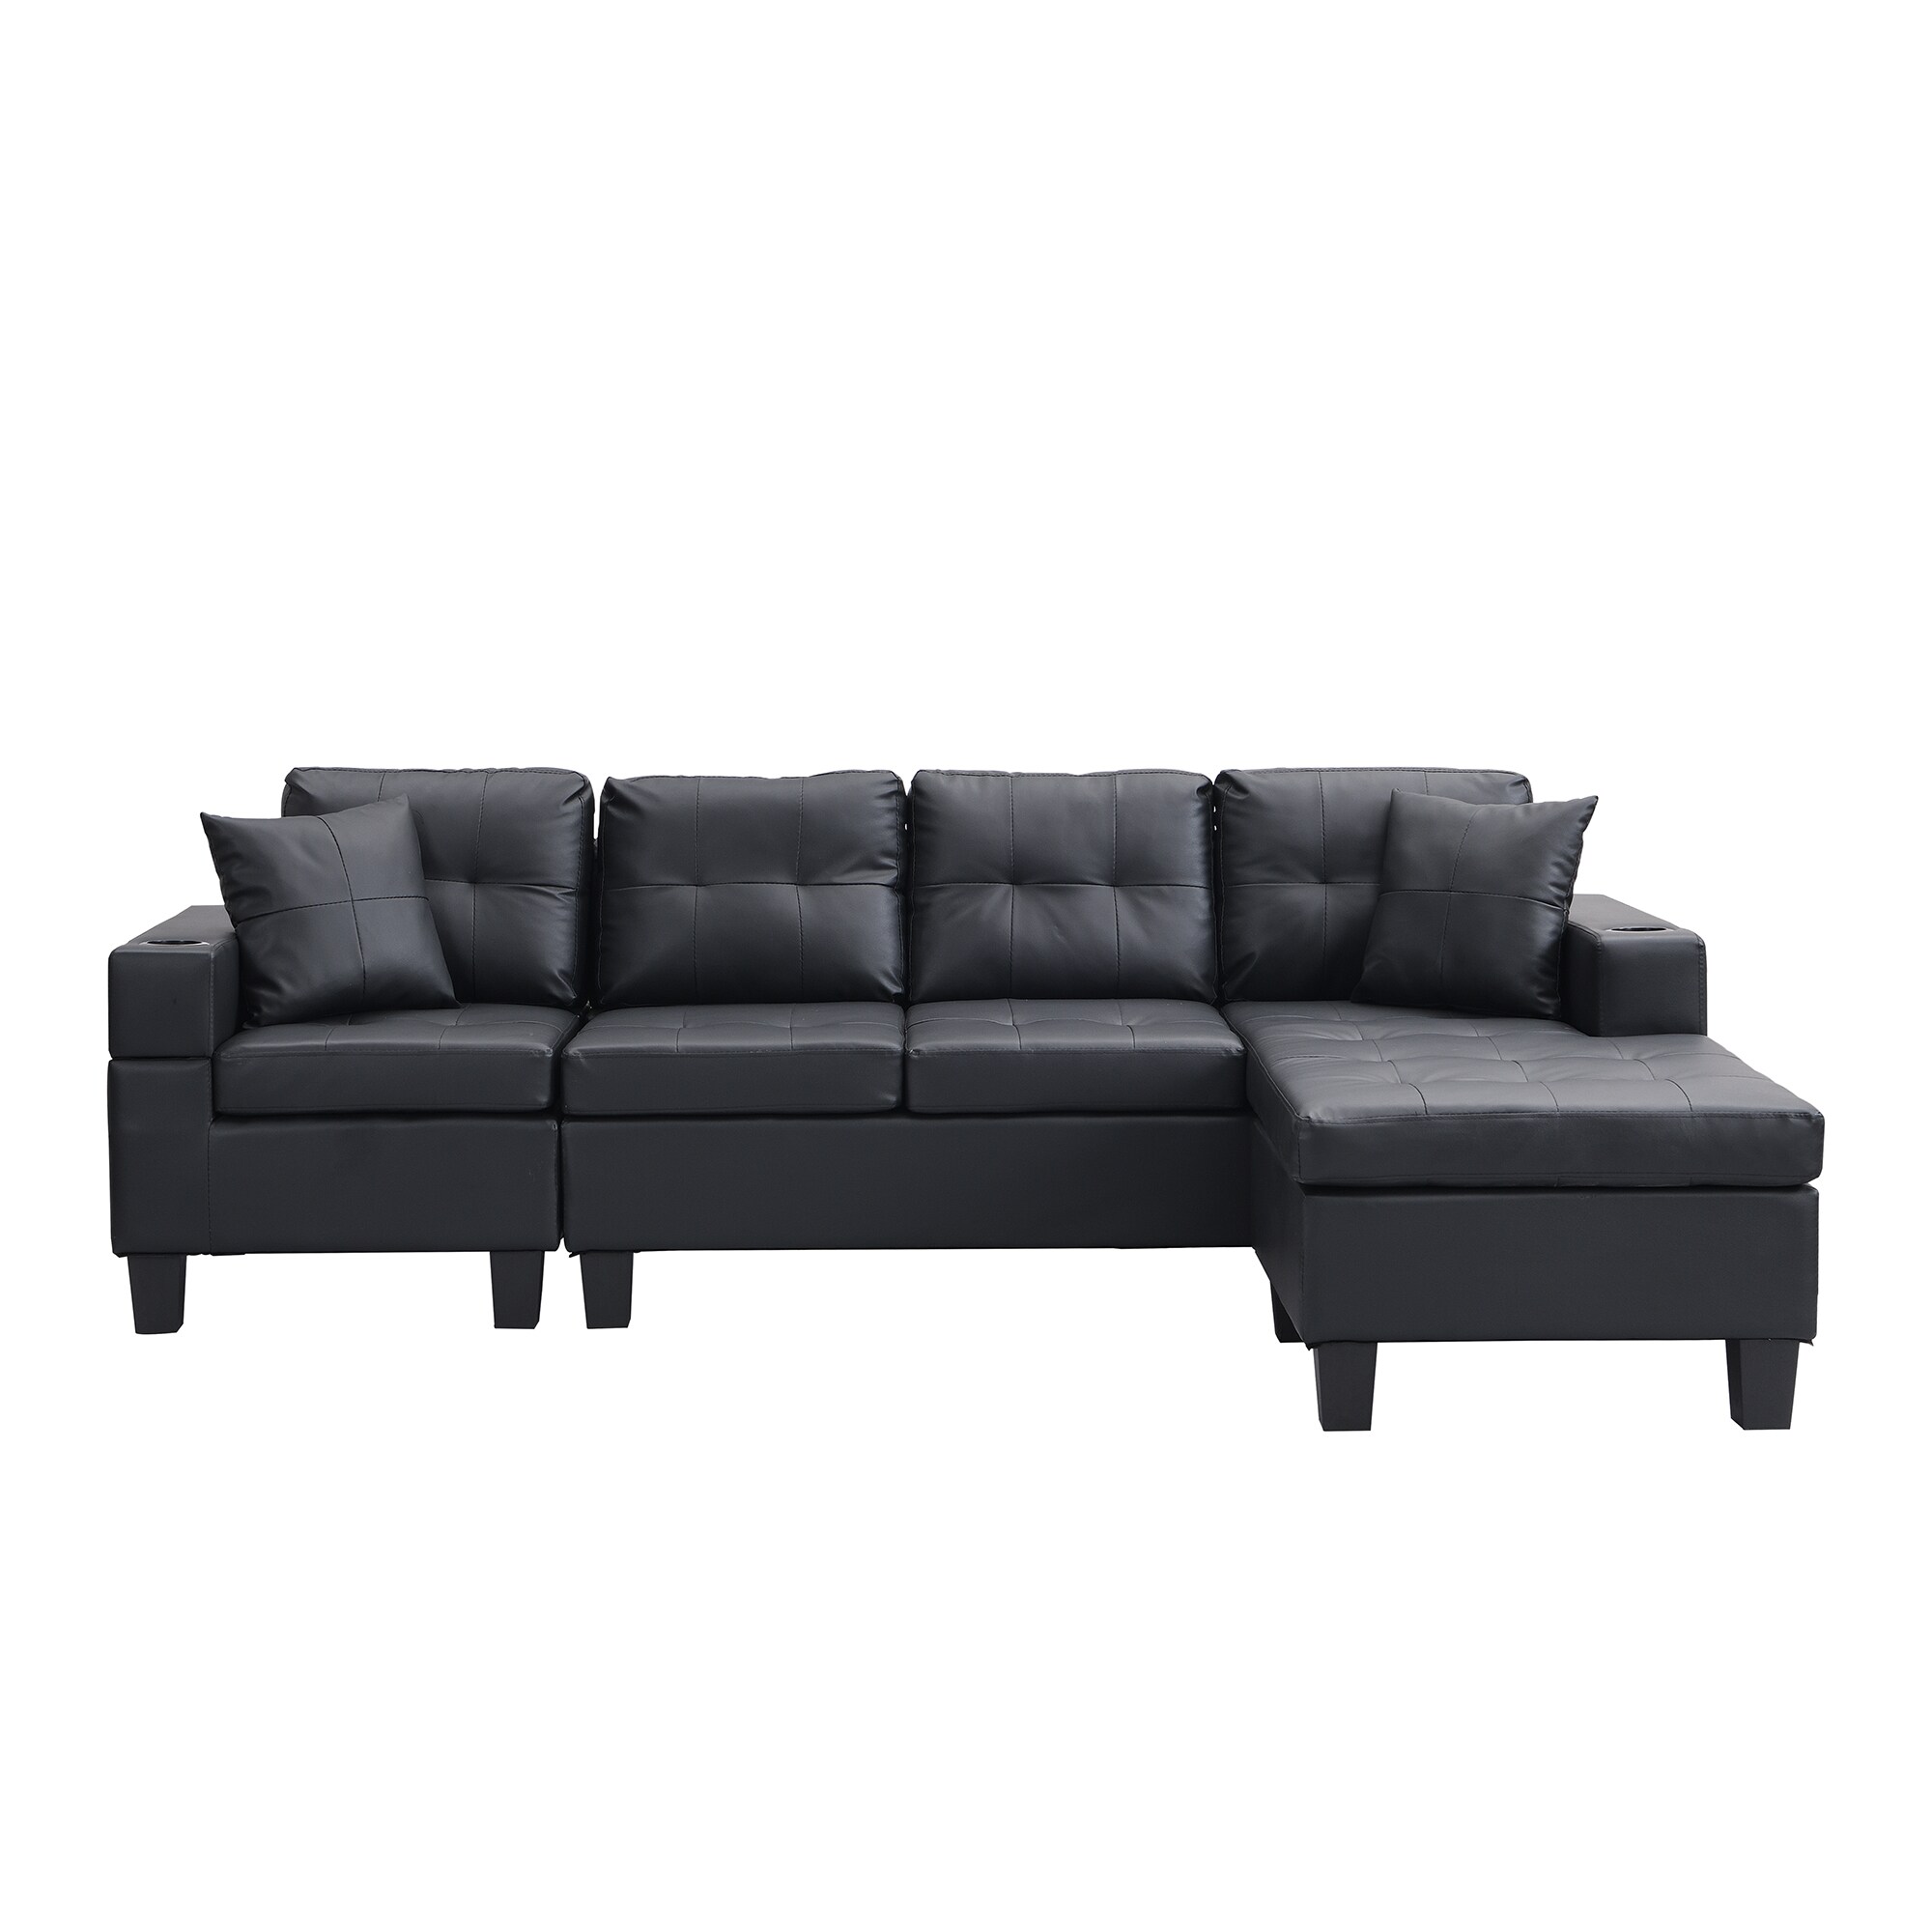 Clihome Shape Chaise Lounge sofa 96.06-in Casual Black Faux Leather 4 ...